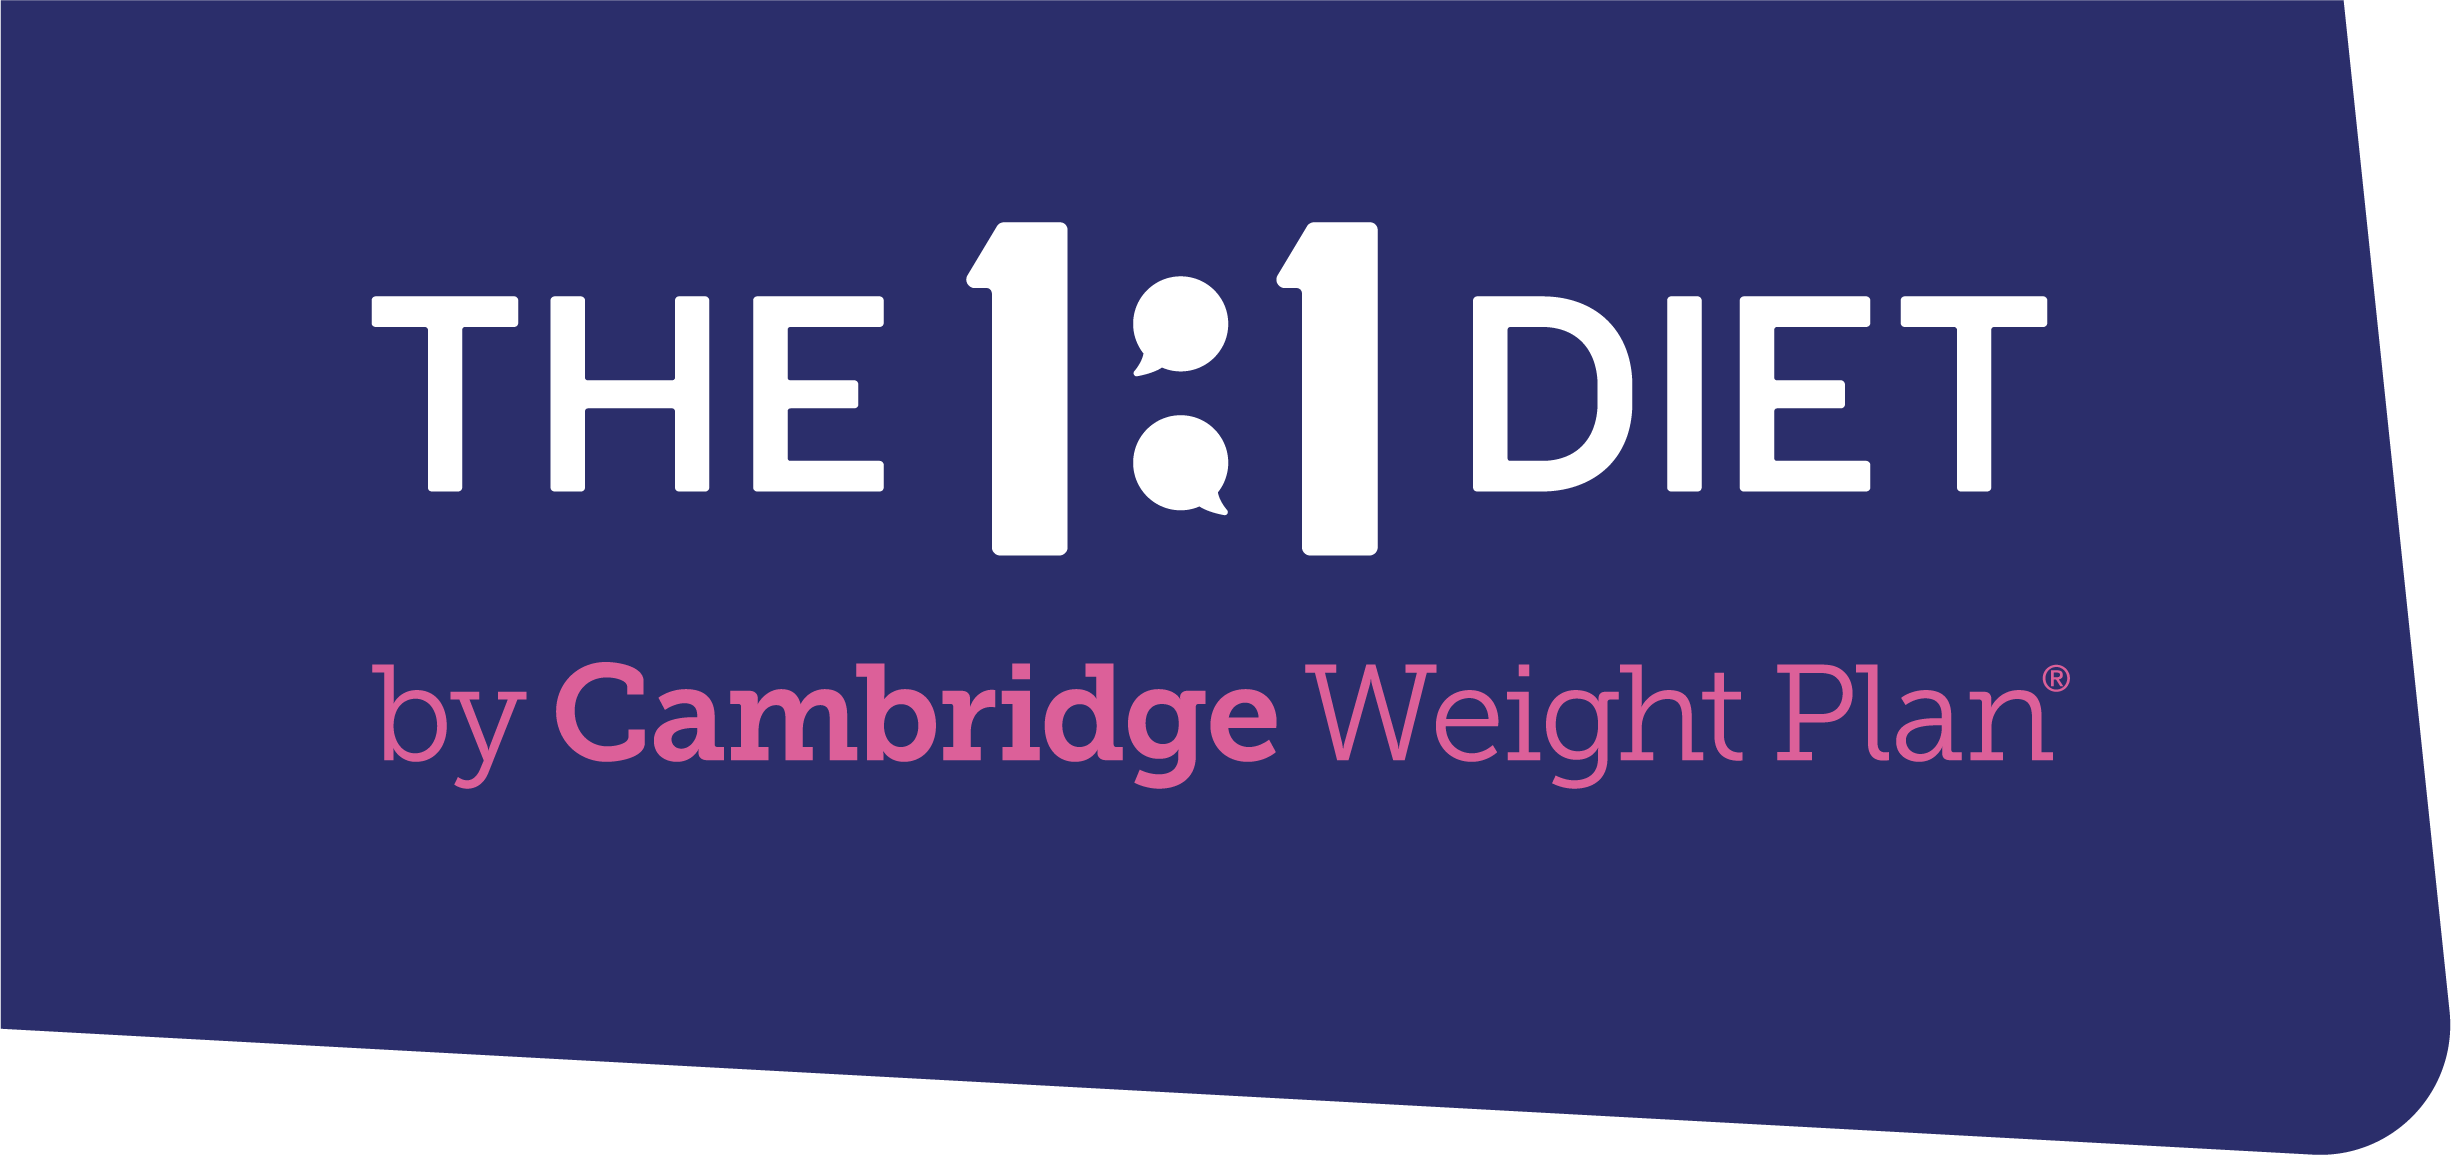 The One 2 One Diet by Cambridge Weight Plan